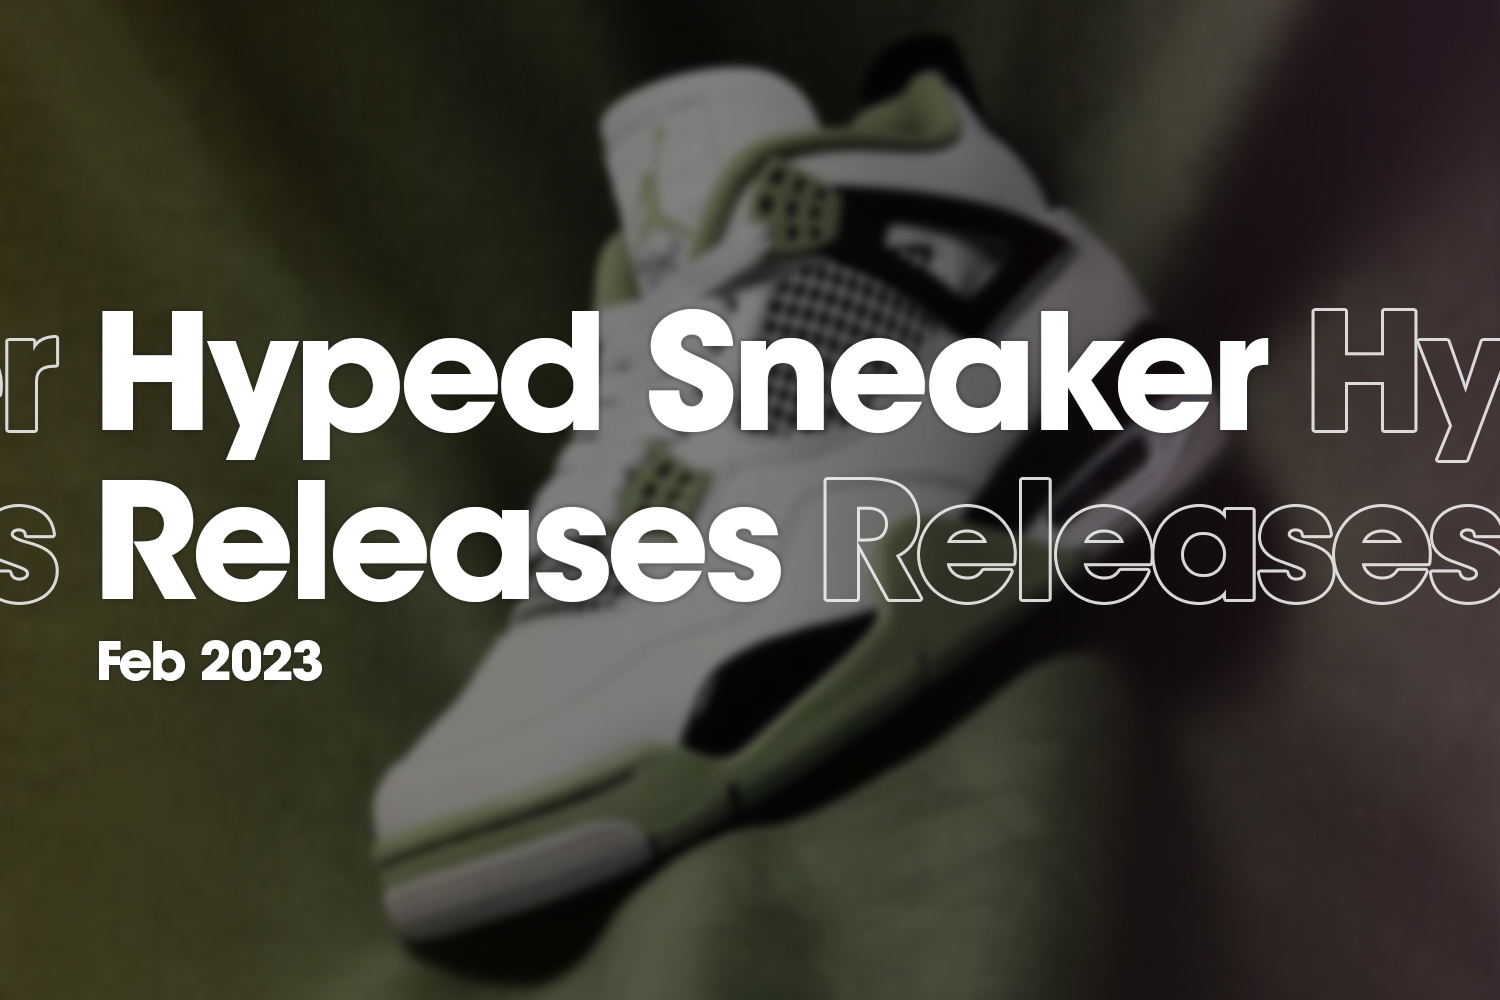 Hyped Sneaker Releases of February 2023